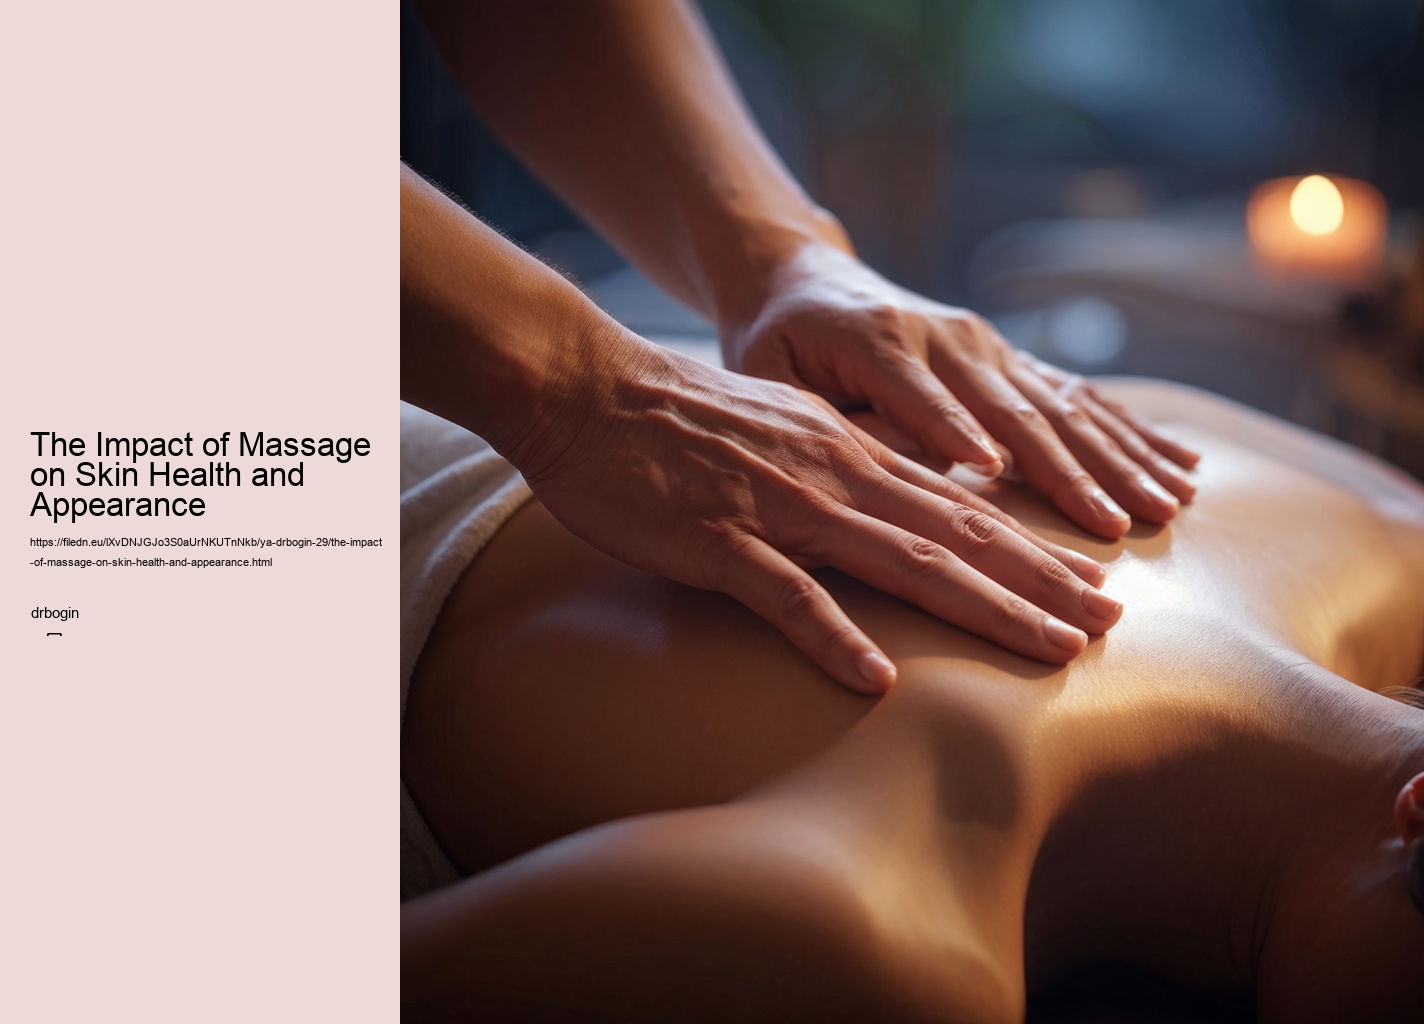 The Impact of Massage on Skin Health and Appearance